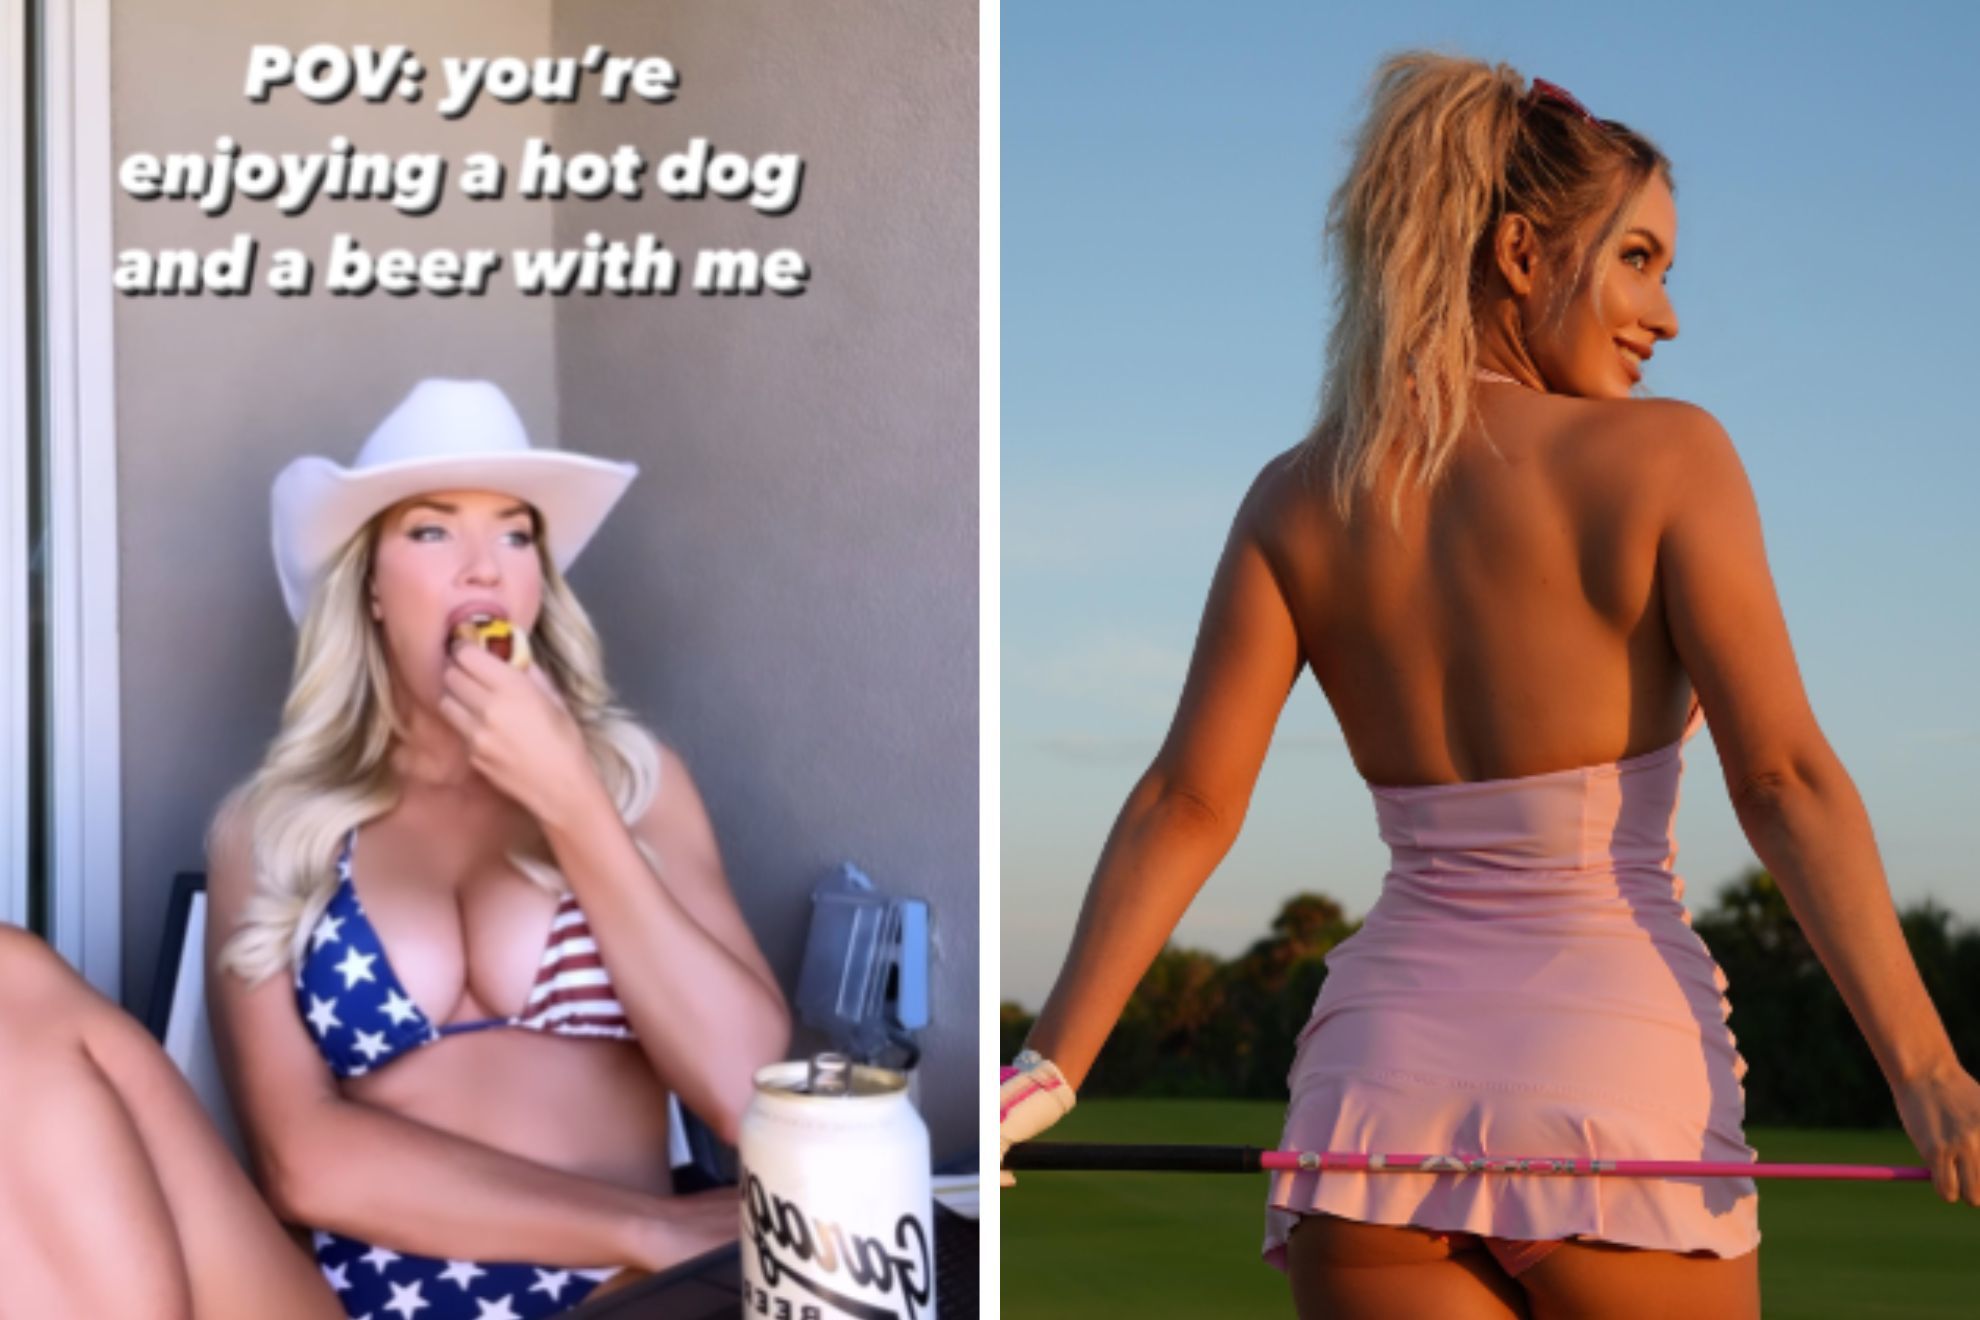 Paige Spiranac teases fans with free beer for life, chance at golfing with her